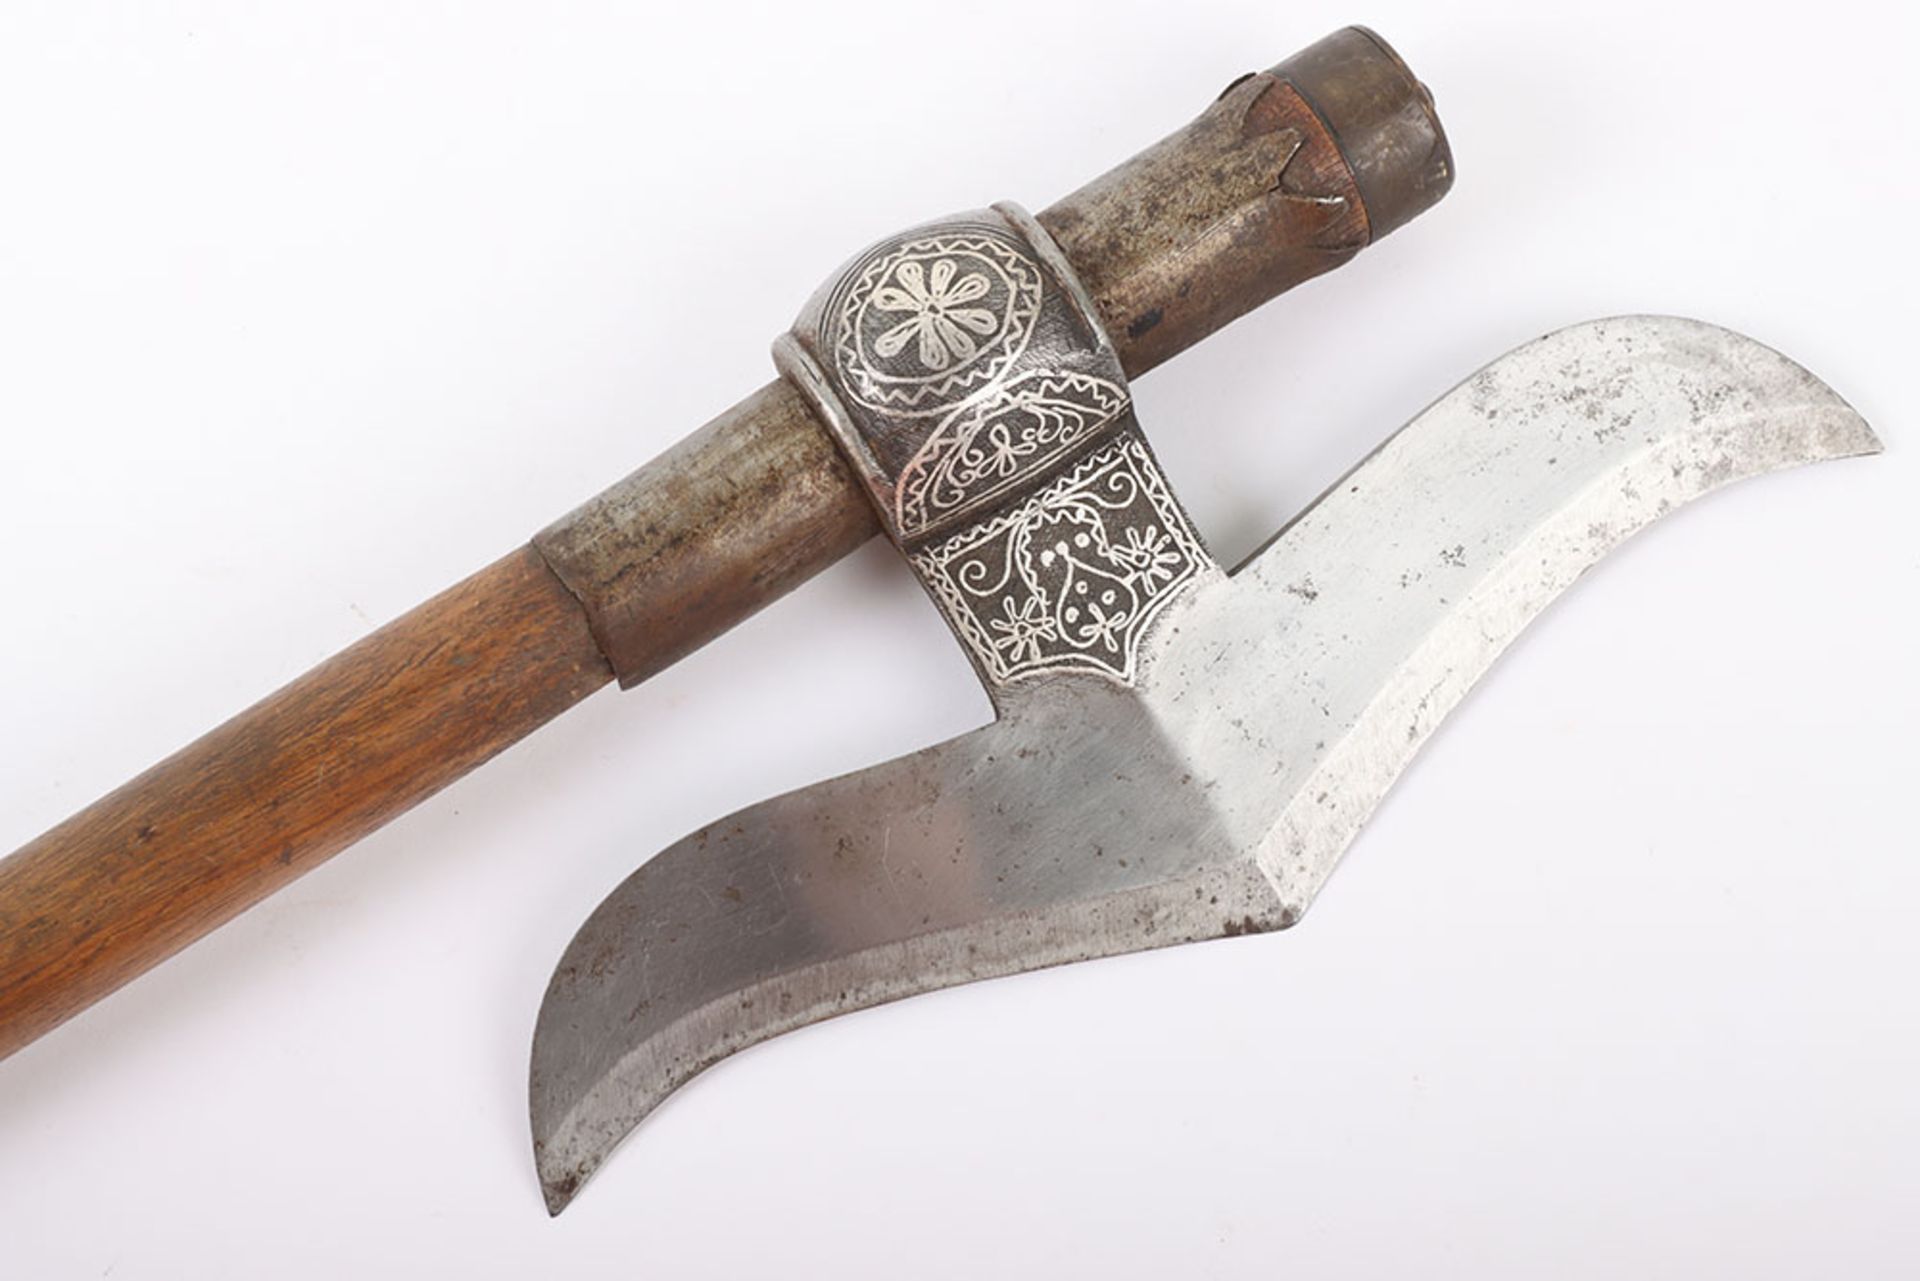 Indian Axe from Chota Nagpur, 19th Century - Image 7 of 10